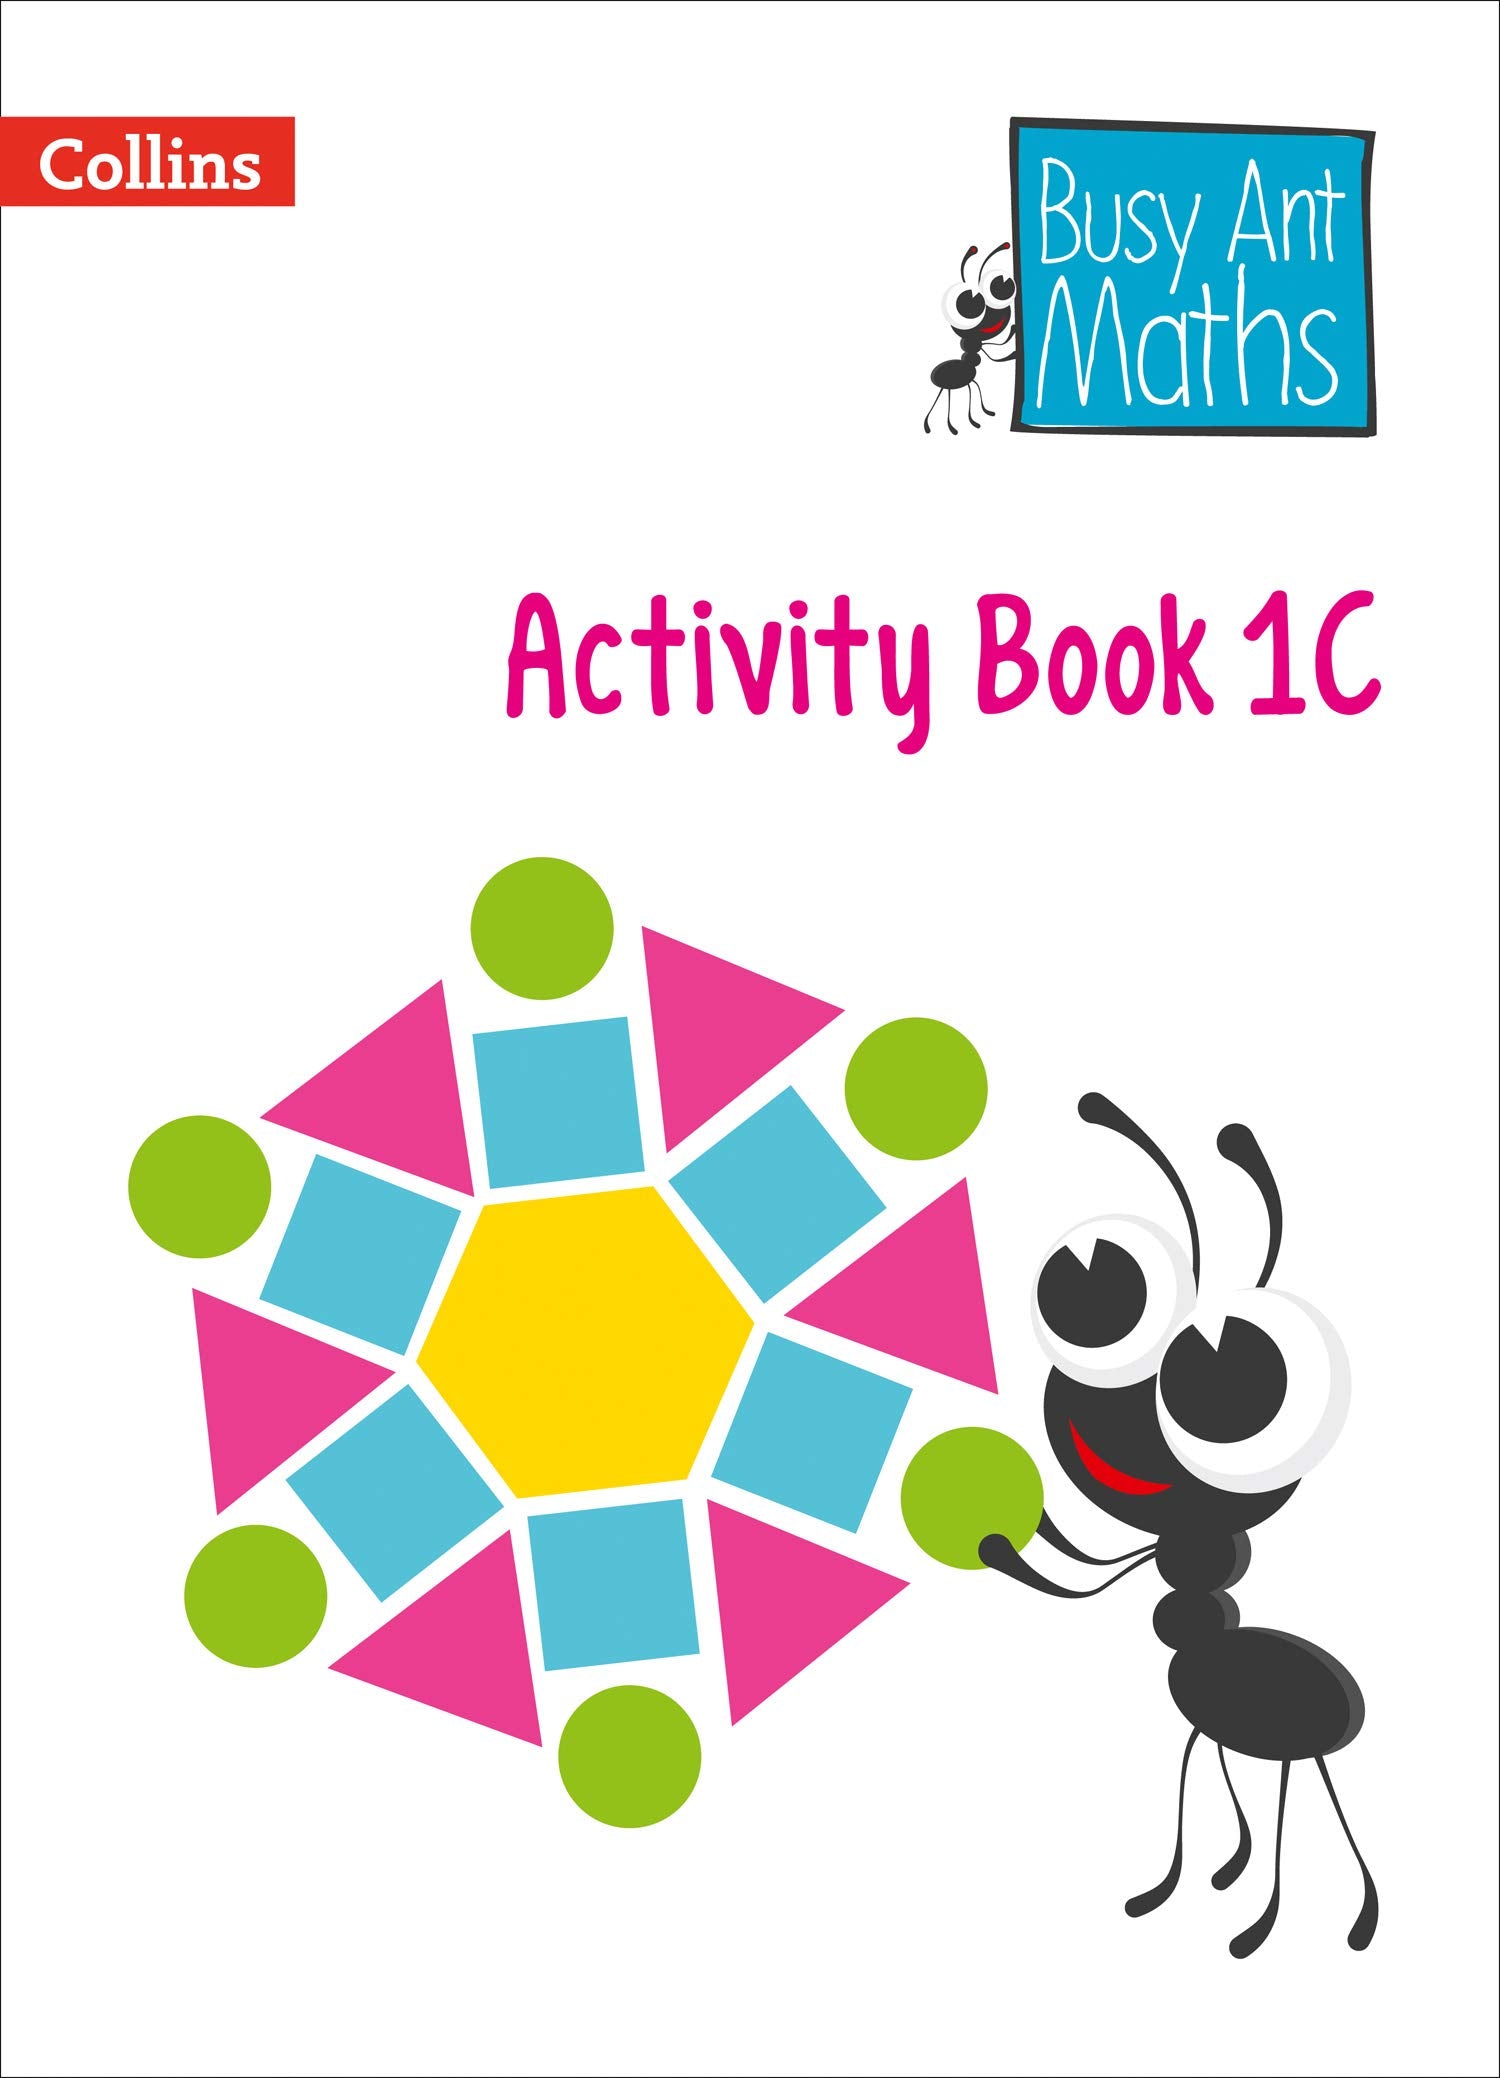 Collins Busy Ant Maths Activity Book 1C